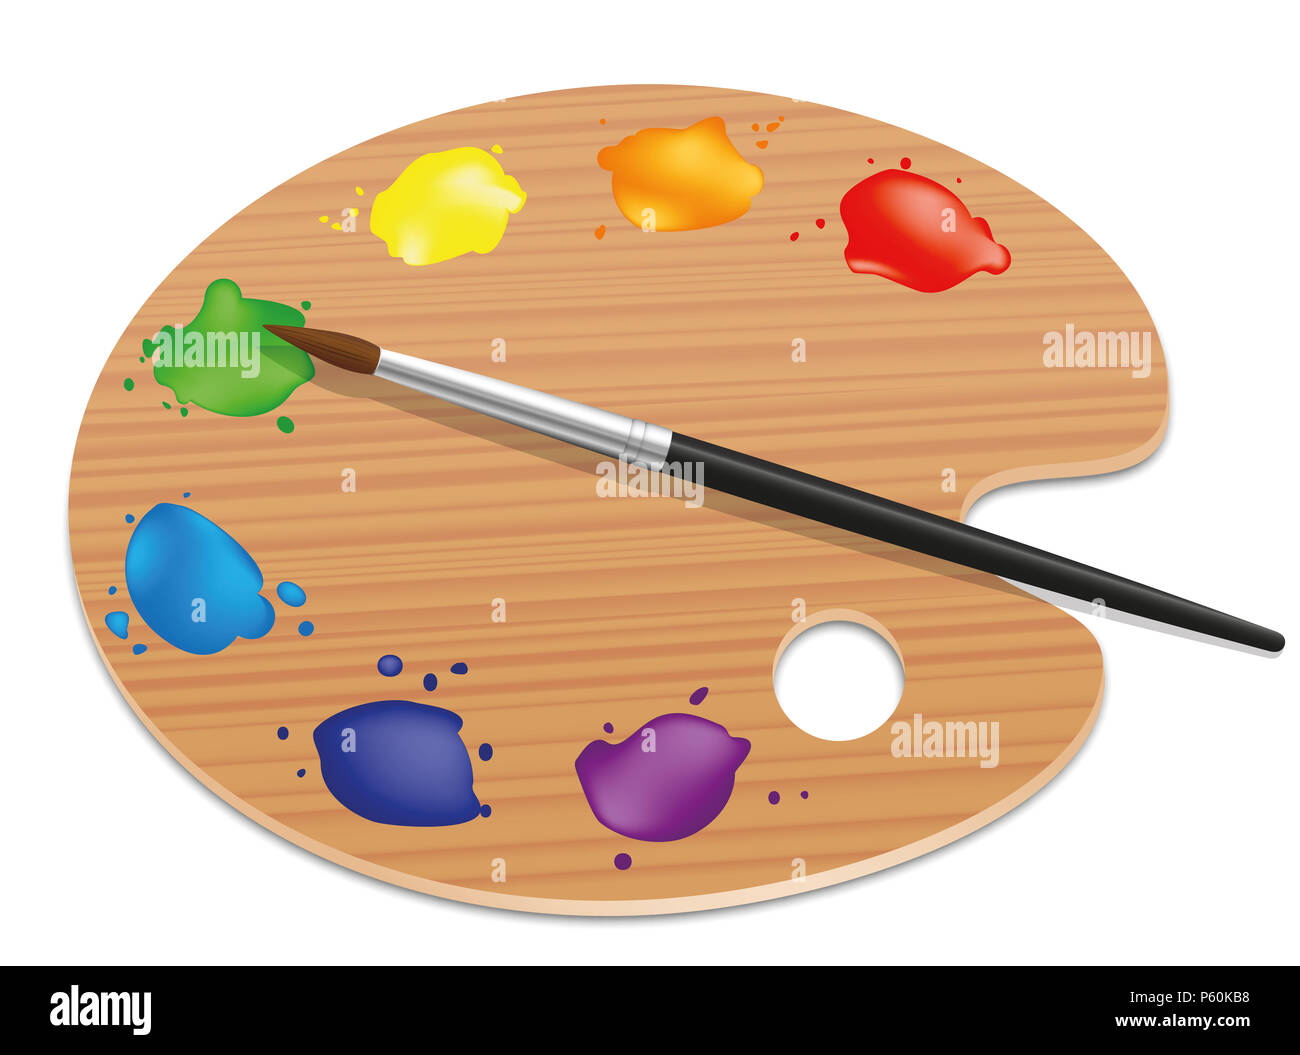 Artists palette. Painting wood board with different colors and a paintbrush - illustration on white background. Stock Photo